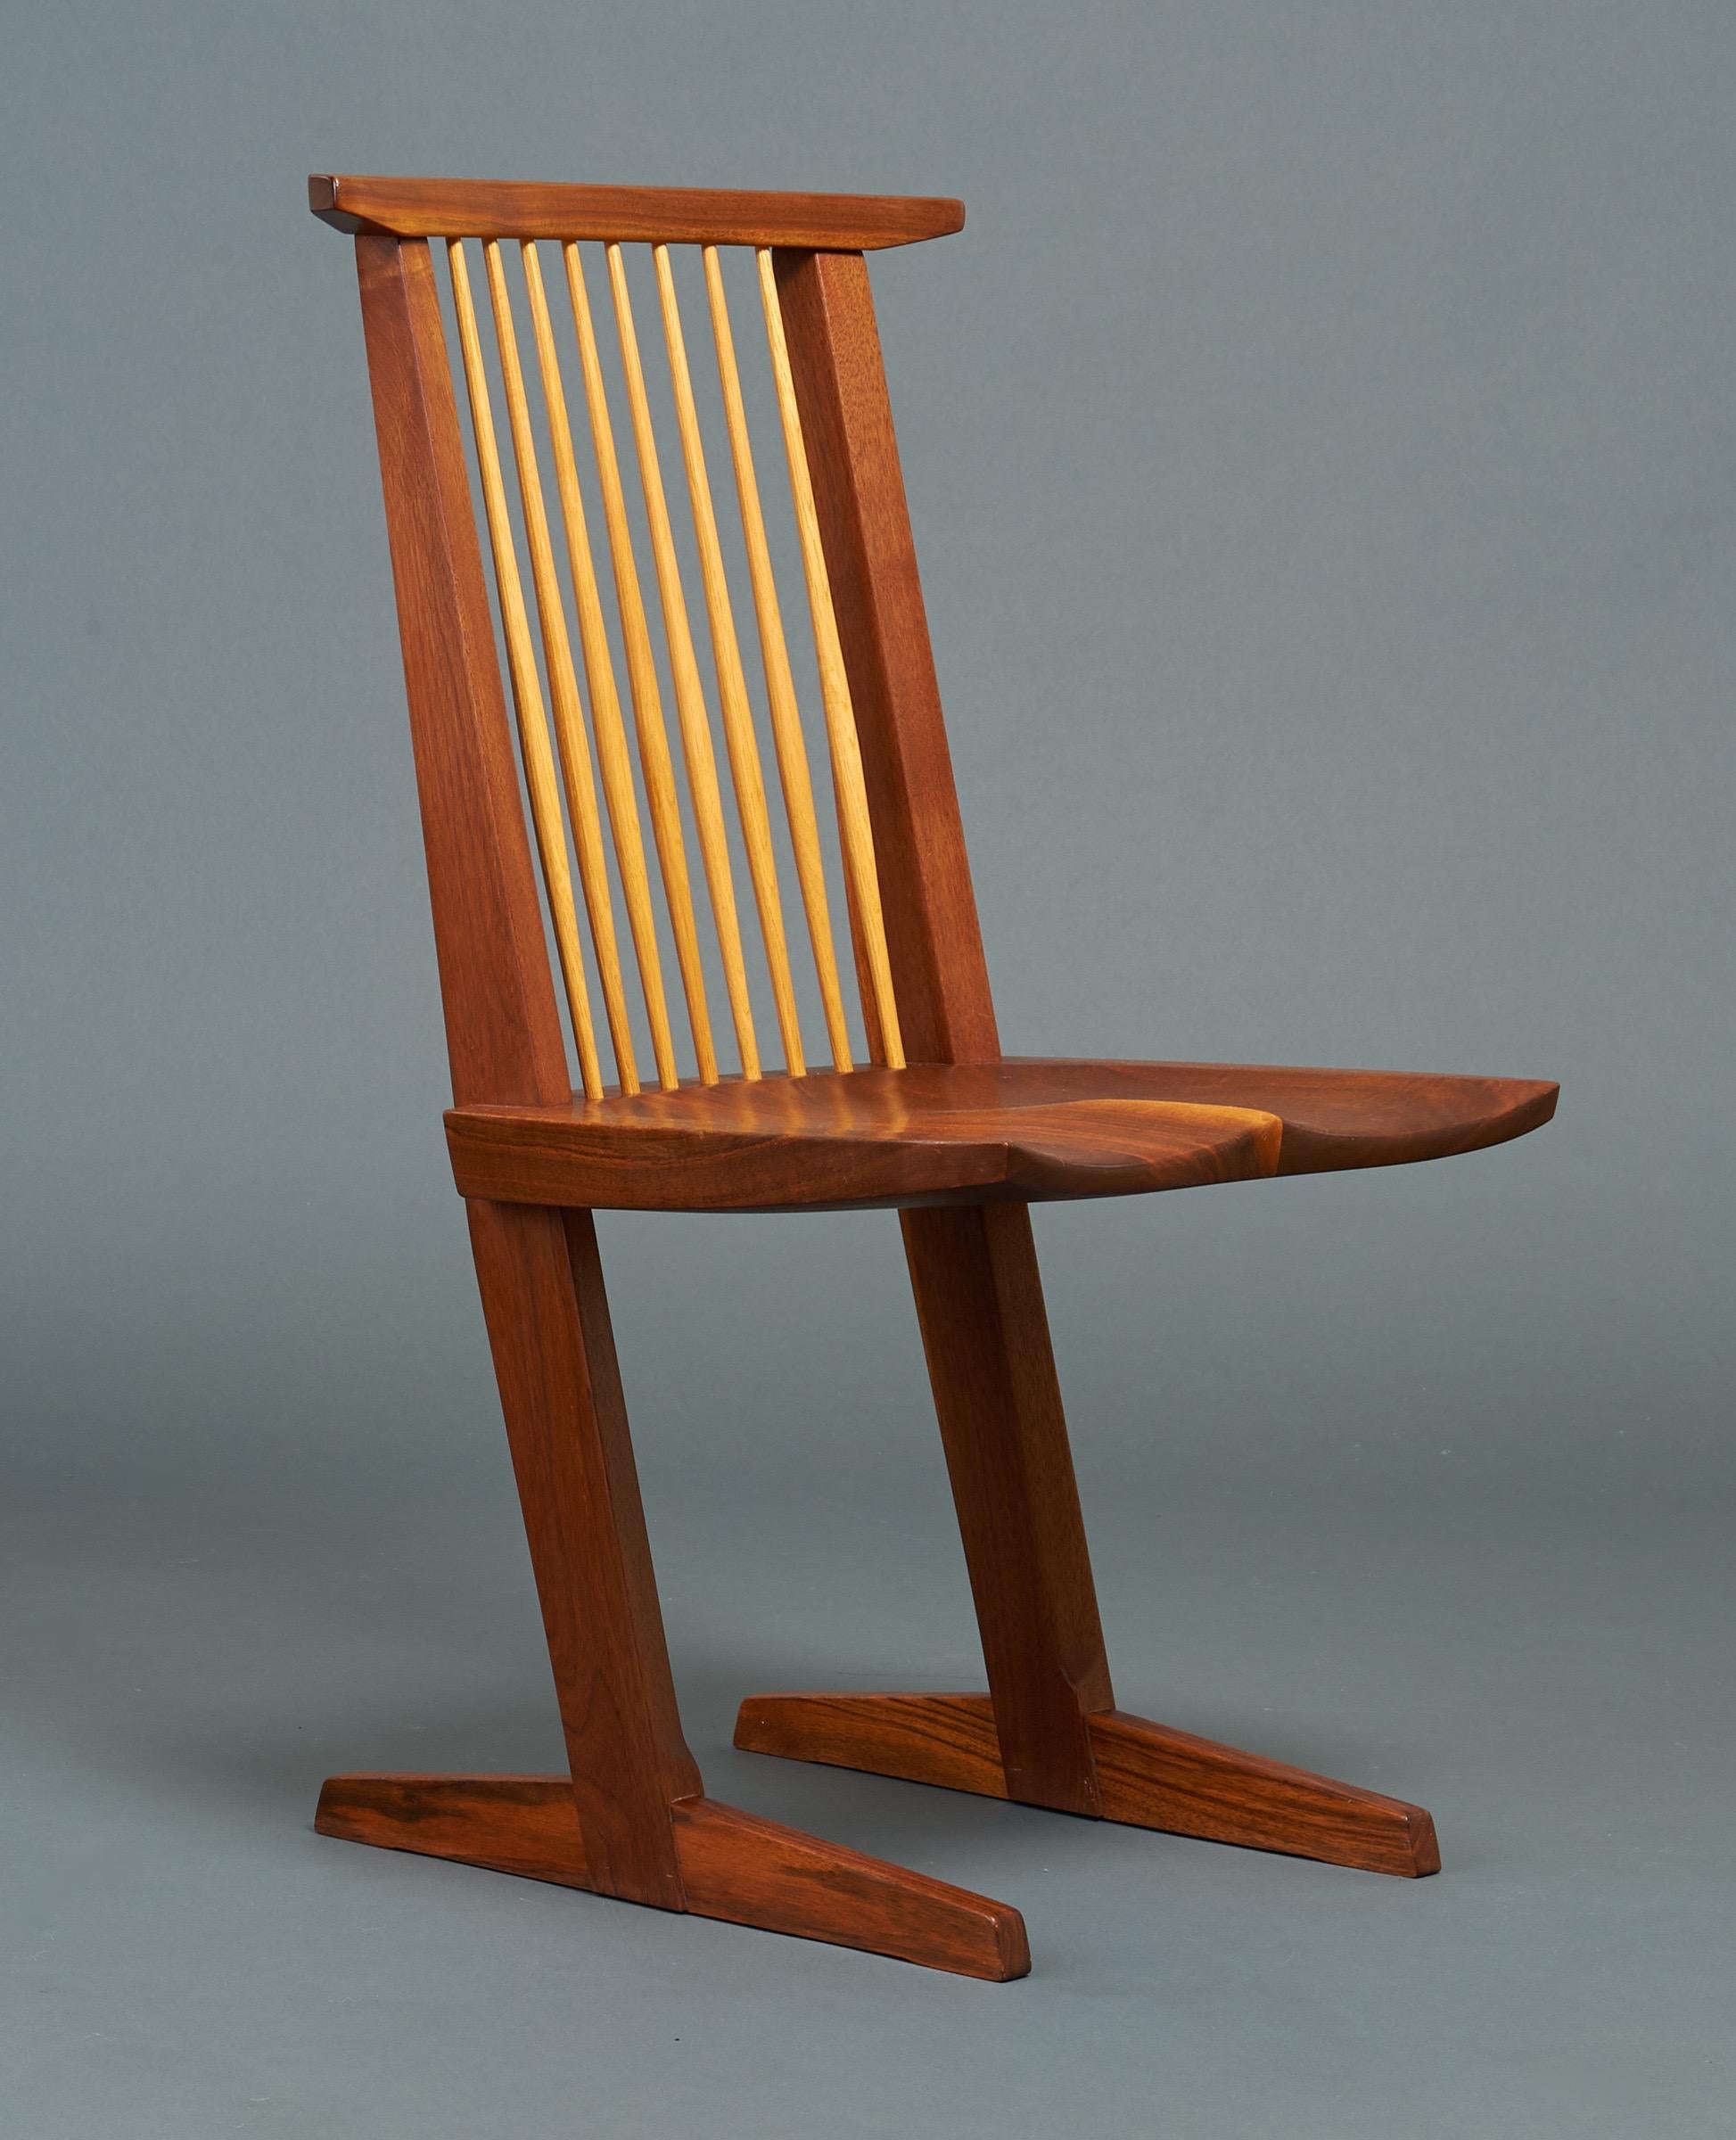 Hickory George Nakashima, Rare Sculptural Pair of Conoid Chairs in Walnut, Signed, 1989 For Sale